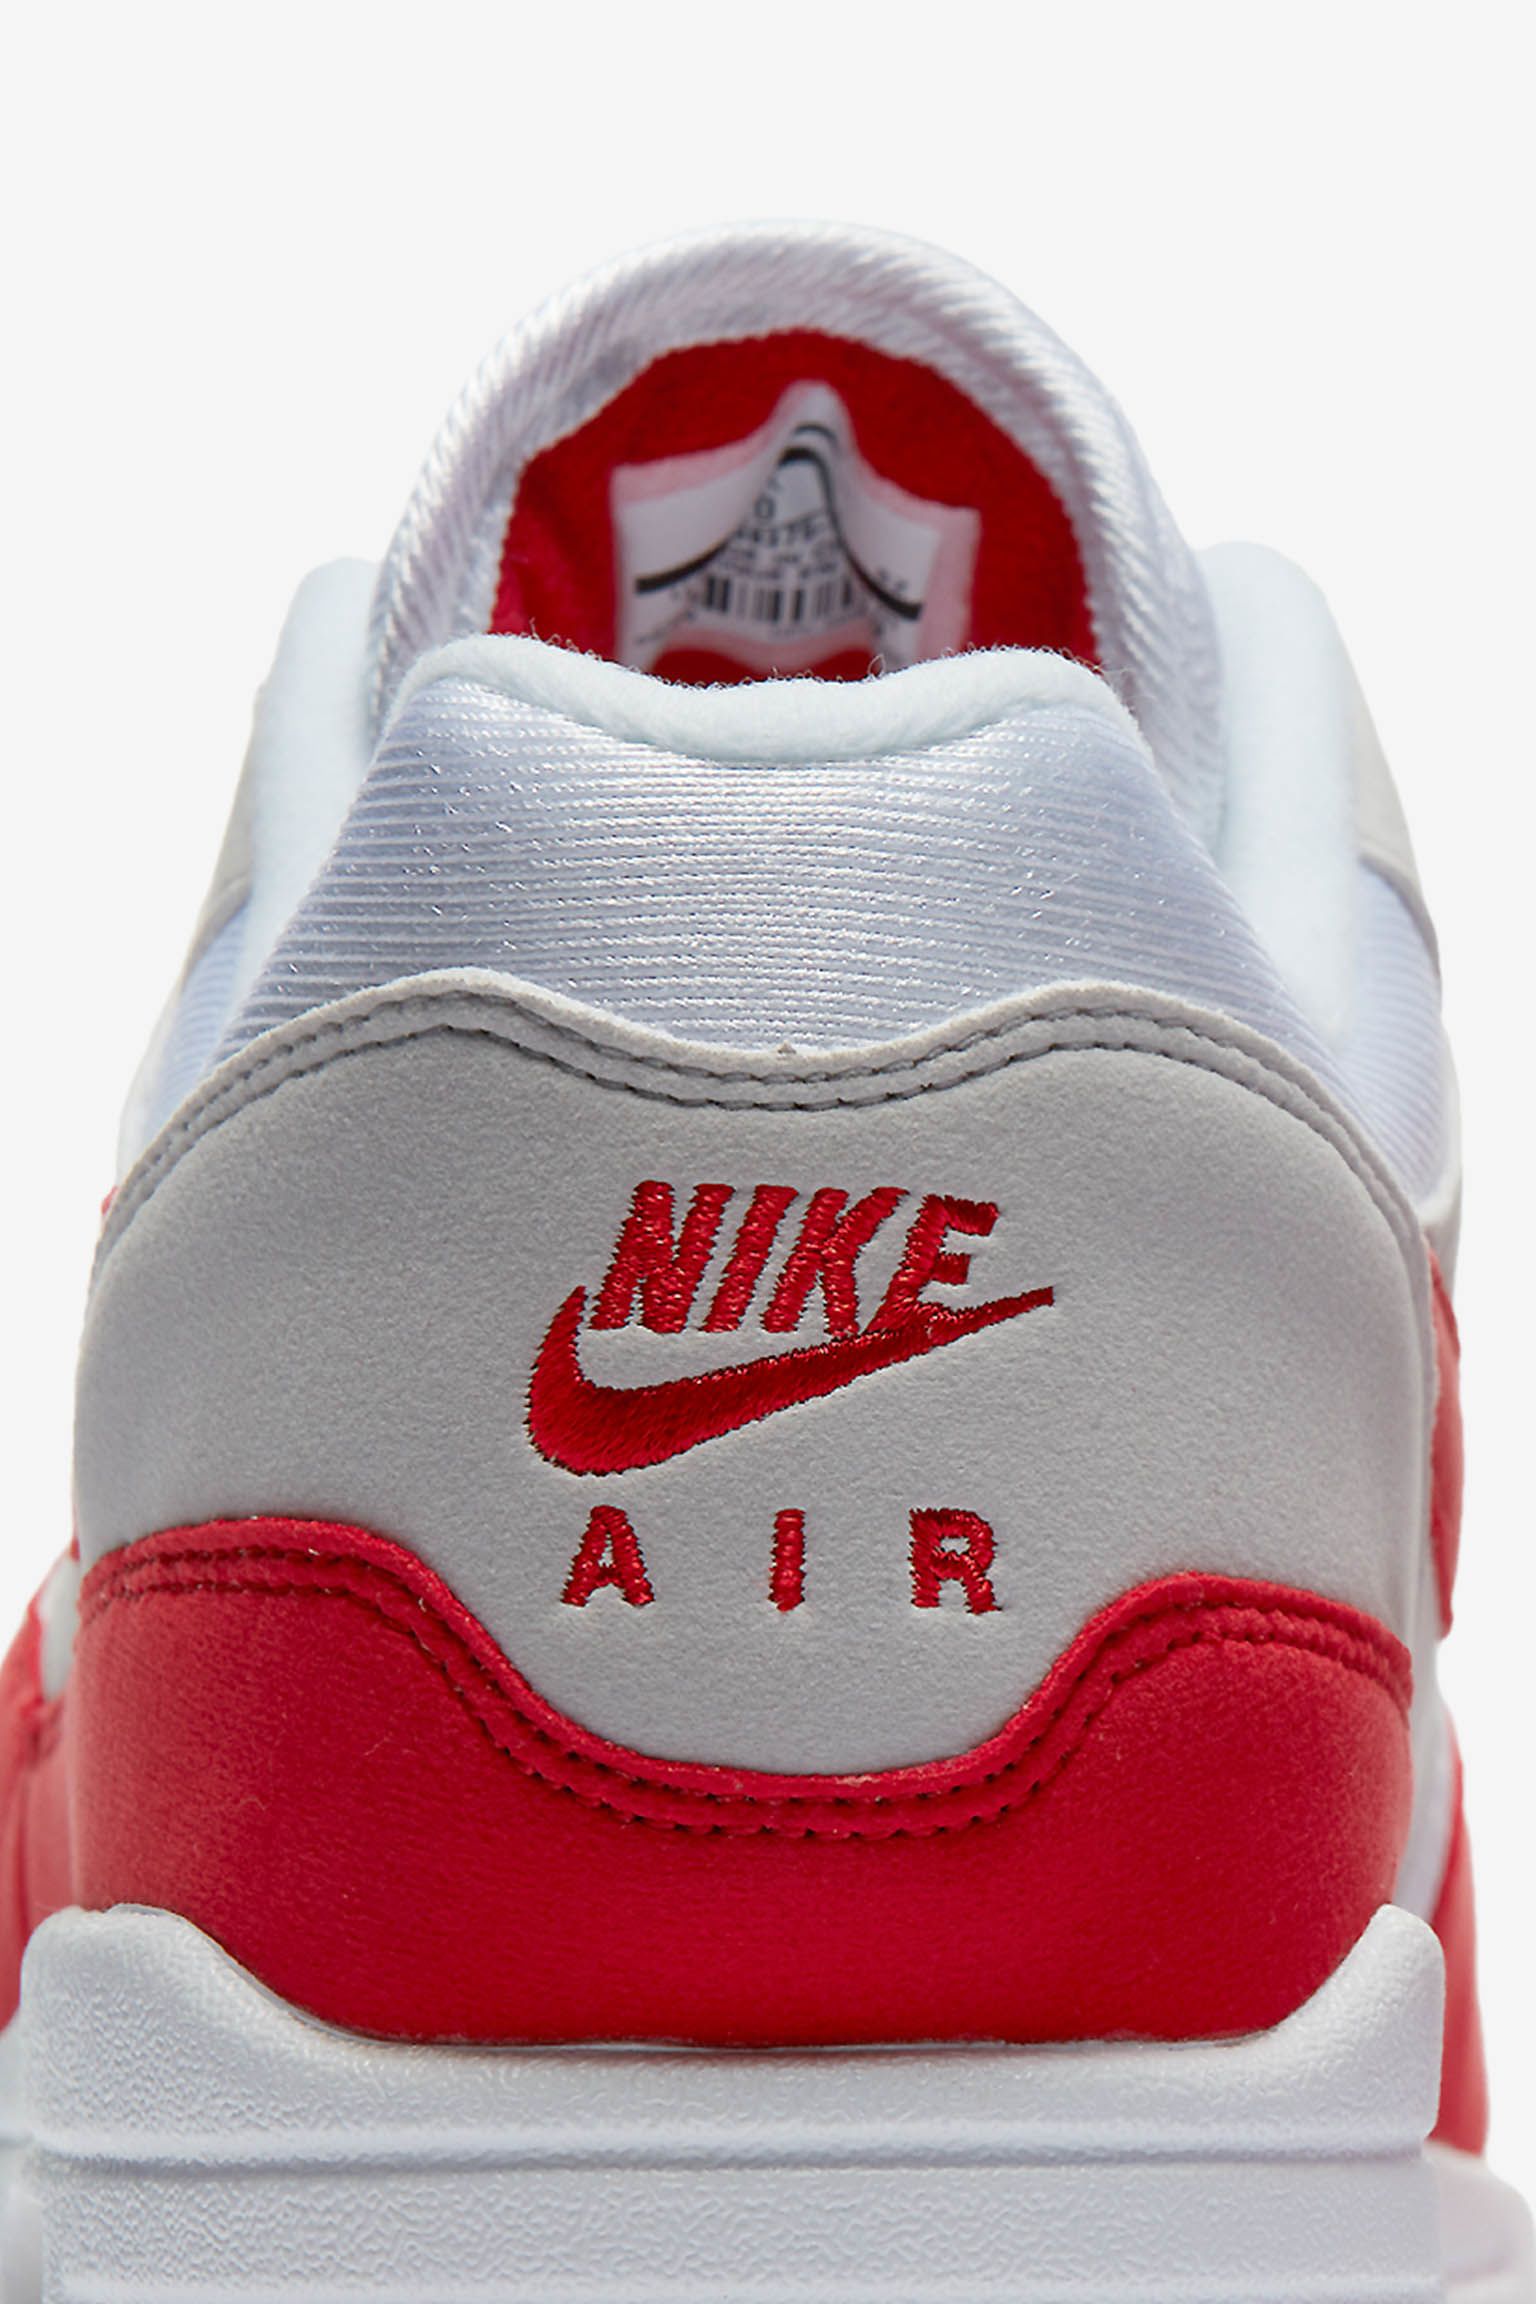 Nike Air Max 1 Anniversary 'White & University Red'. Nike SNKRS ايكيا سراير